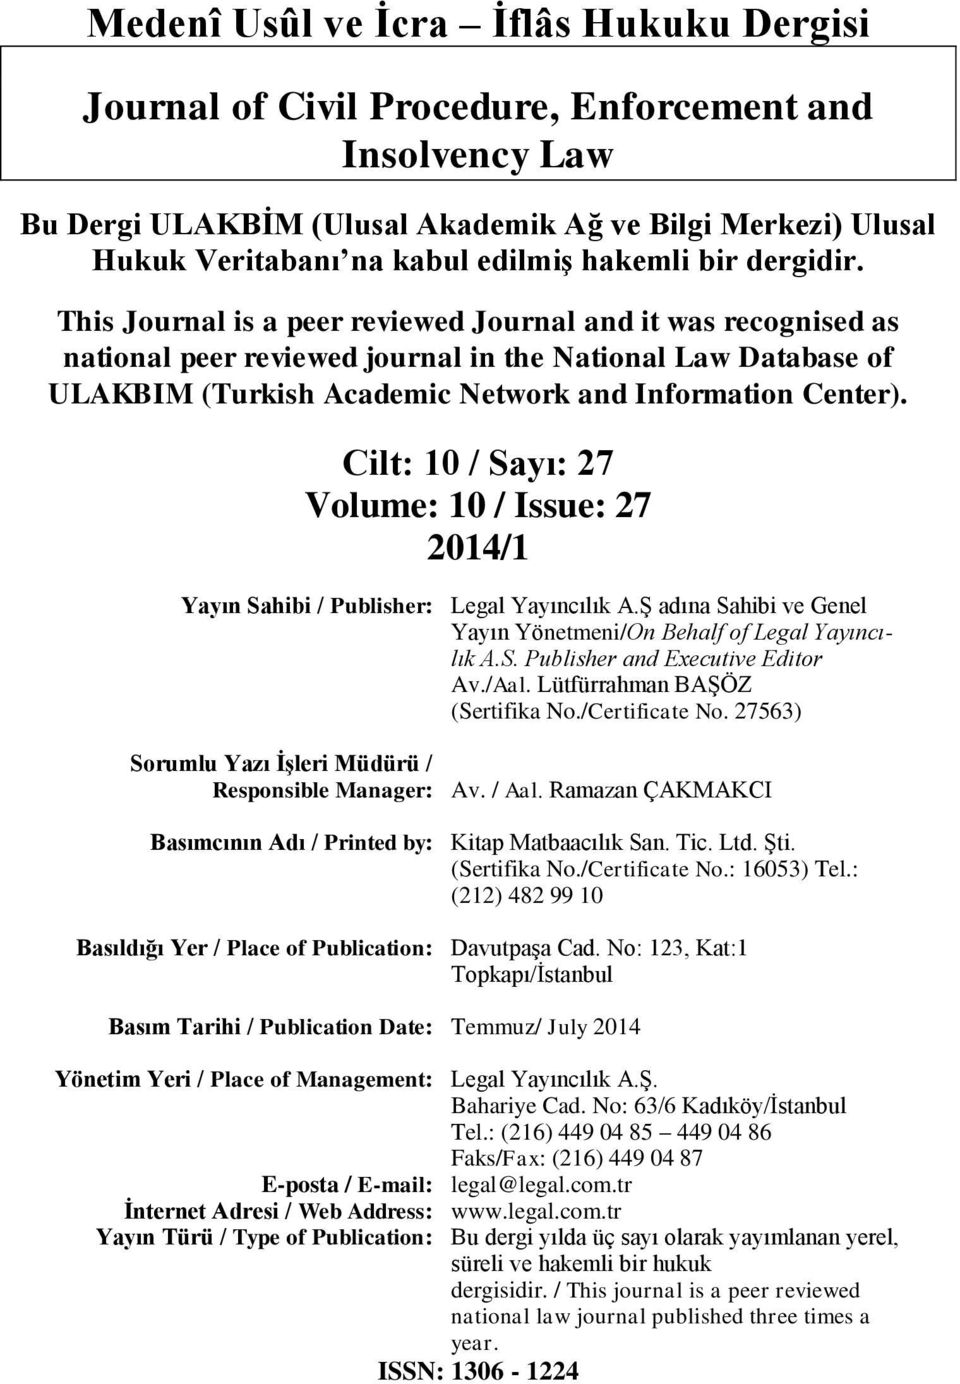 This Journal is a peer reviewed Journal and it was recognised as national peer reviewed journal in the National Law Database of ULAKBIM (Turkish Academic Network and Information Center).